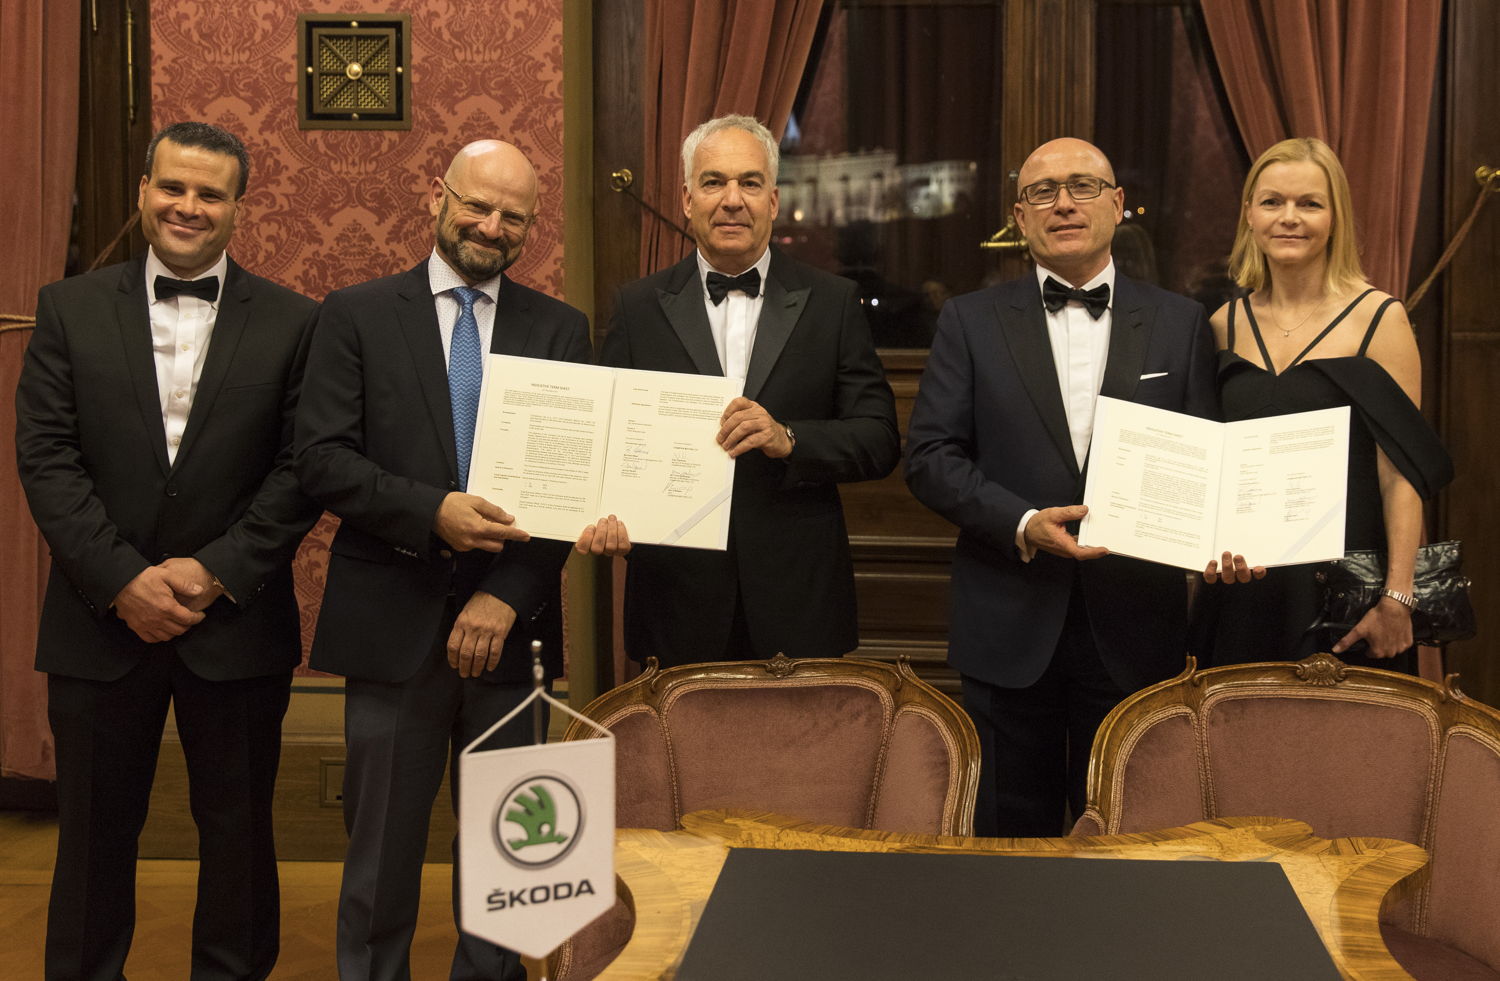 establish Joint Venture in Israel
ŠKODA AUTO DigiLab and the Israeli ŠKODA importer Champion Motors have established a joint venture in Tel Aviv, which will commence operations in January 2018.
ŠKODA CEO Bernhard Maier (second from the right), Jarmila Plachá, head of ŠKODA AUTO Digilab, Champion Motors CEO Dan Orenstein (on the left), and Erez Vigodman (in the middle) and Dr. Ing. Yoram Turbowicz (second from the left), Board Members of the Israeli joint venture partner, signed the contracts for the foundation of the joint venture on the 14 December 2017 at the Rudolfinum in Prague's Old Town.